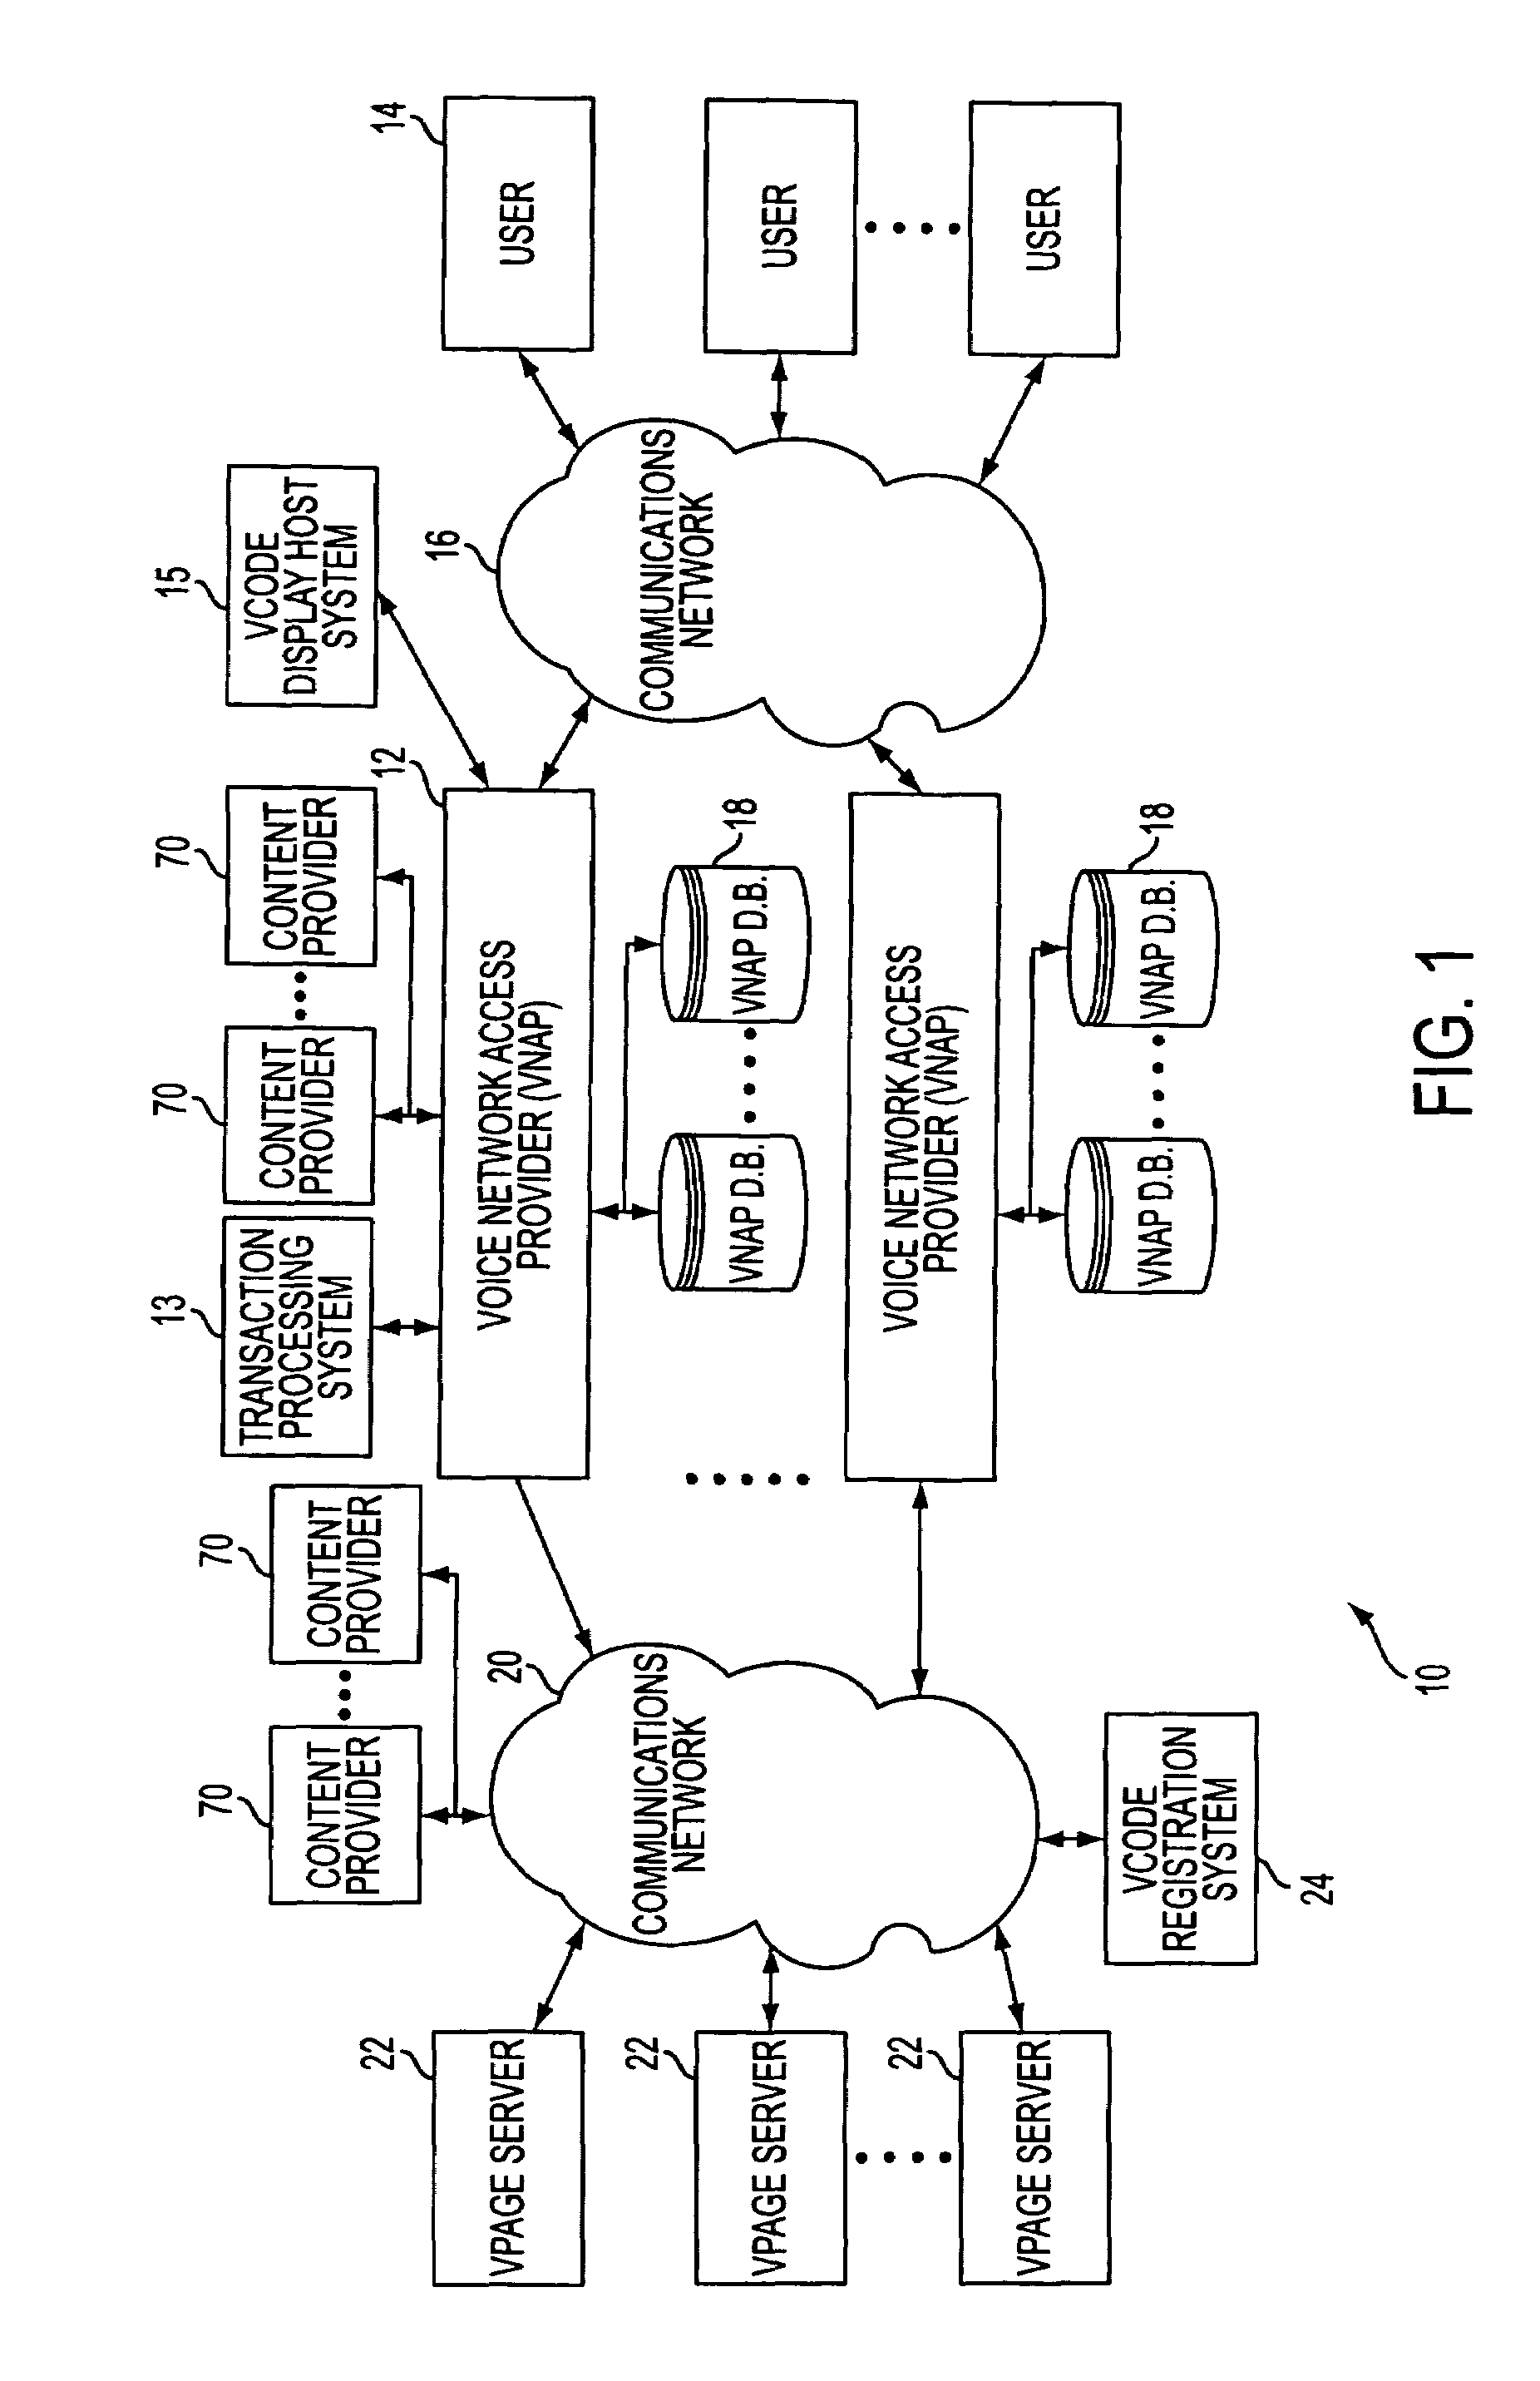 Voice page directory system in a voice page creation and delivery system